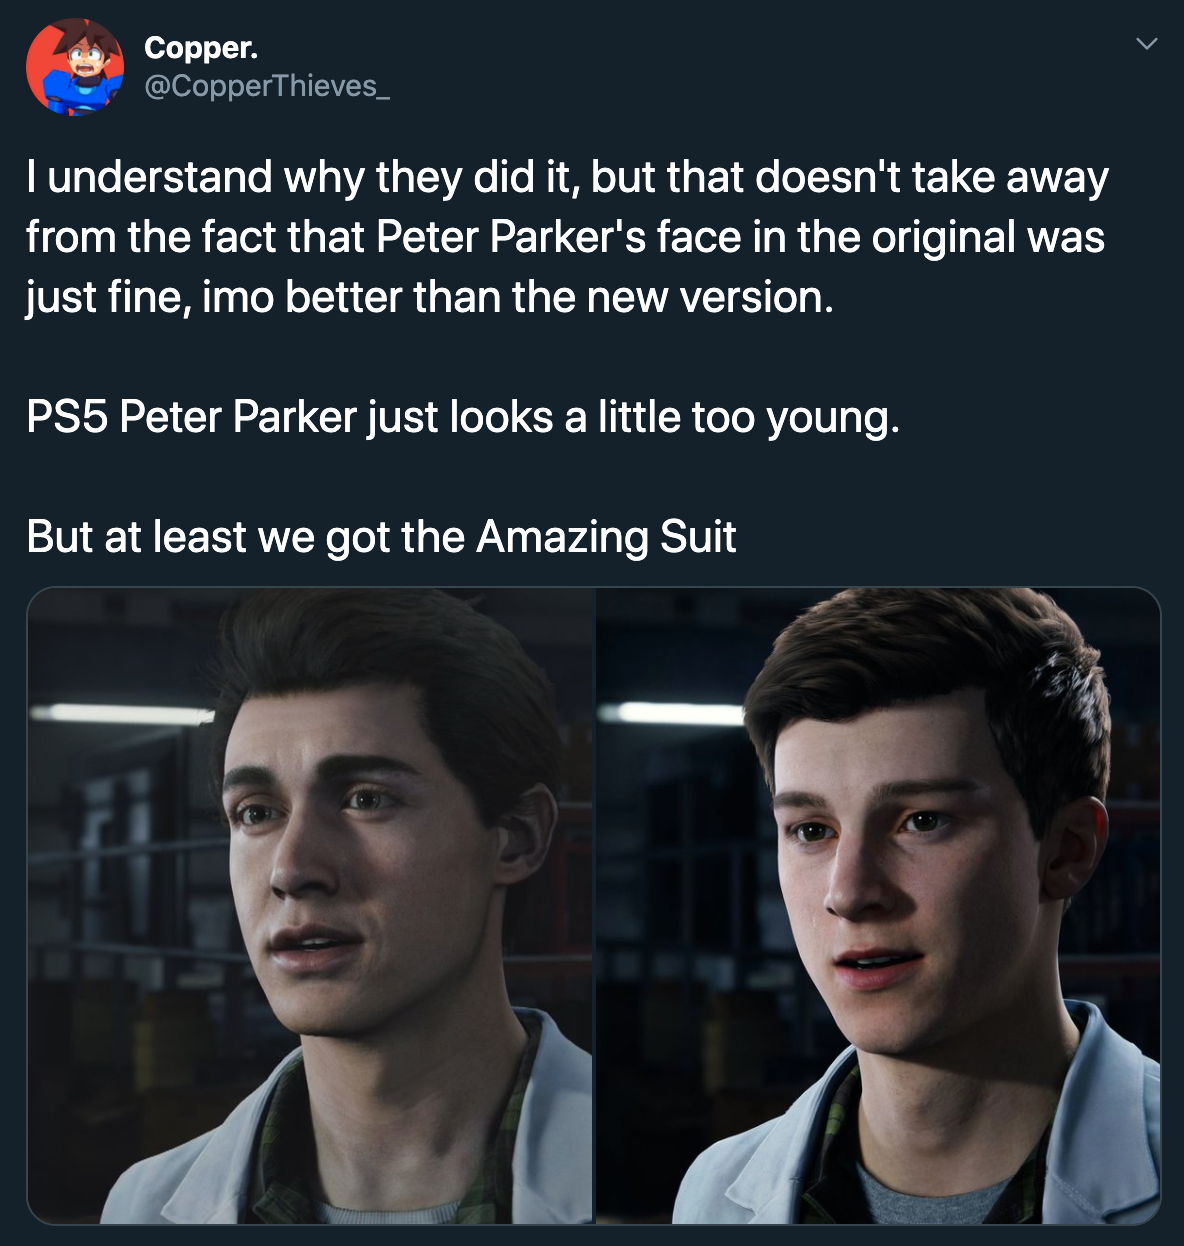 I understand why they did it, but that doesn't take away from the fact that Peter Parker's face in the original was just fine, imo better than the new version. PS5 Peter Parker just looks a little too young. But at least we got the Amazing new suit